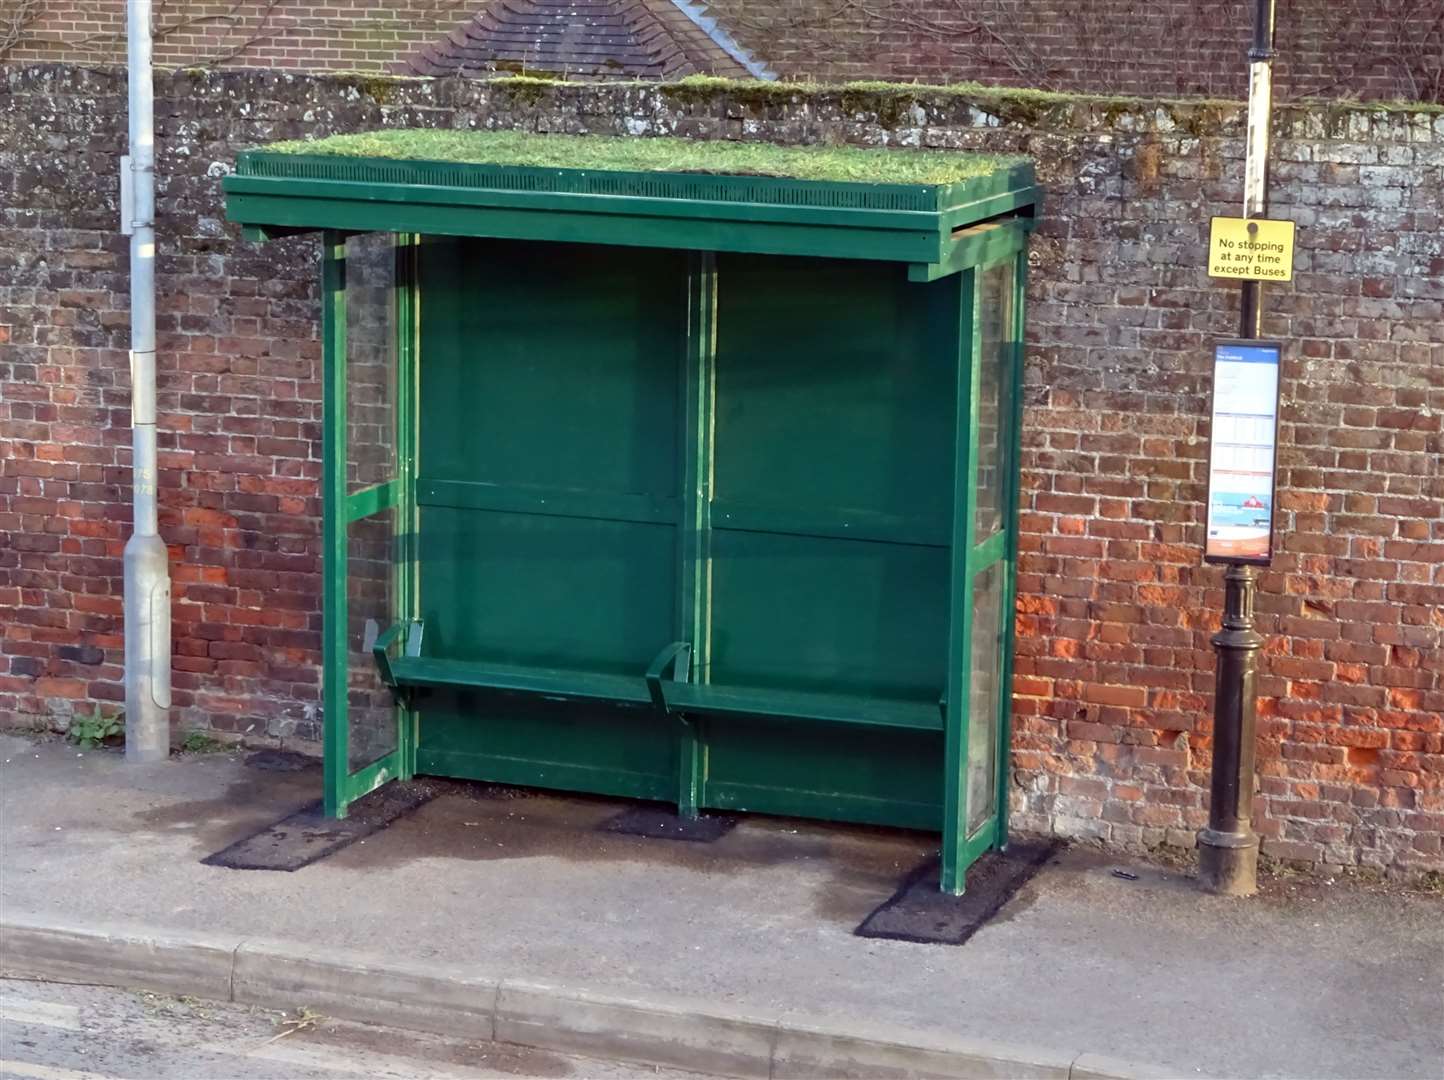 The new bee-friendly bus shelter in Wingham. Picture: Wingham Parish Council